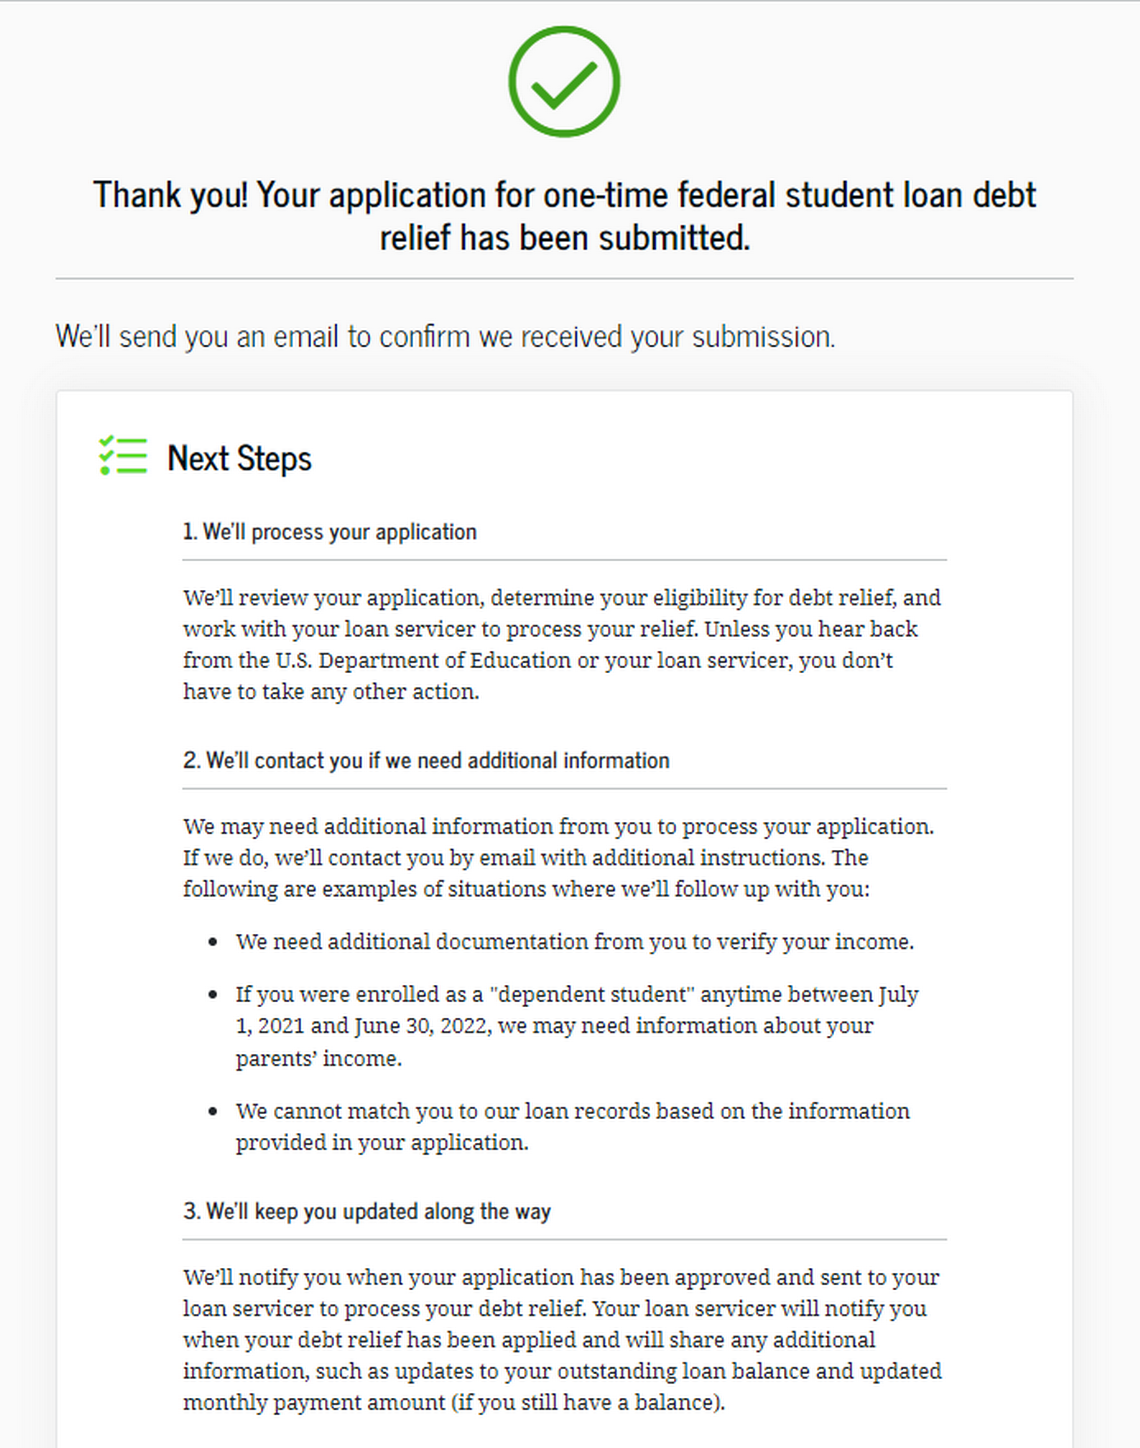 The confirmation applicants receive when their application for student loan relief has been submitted.